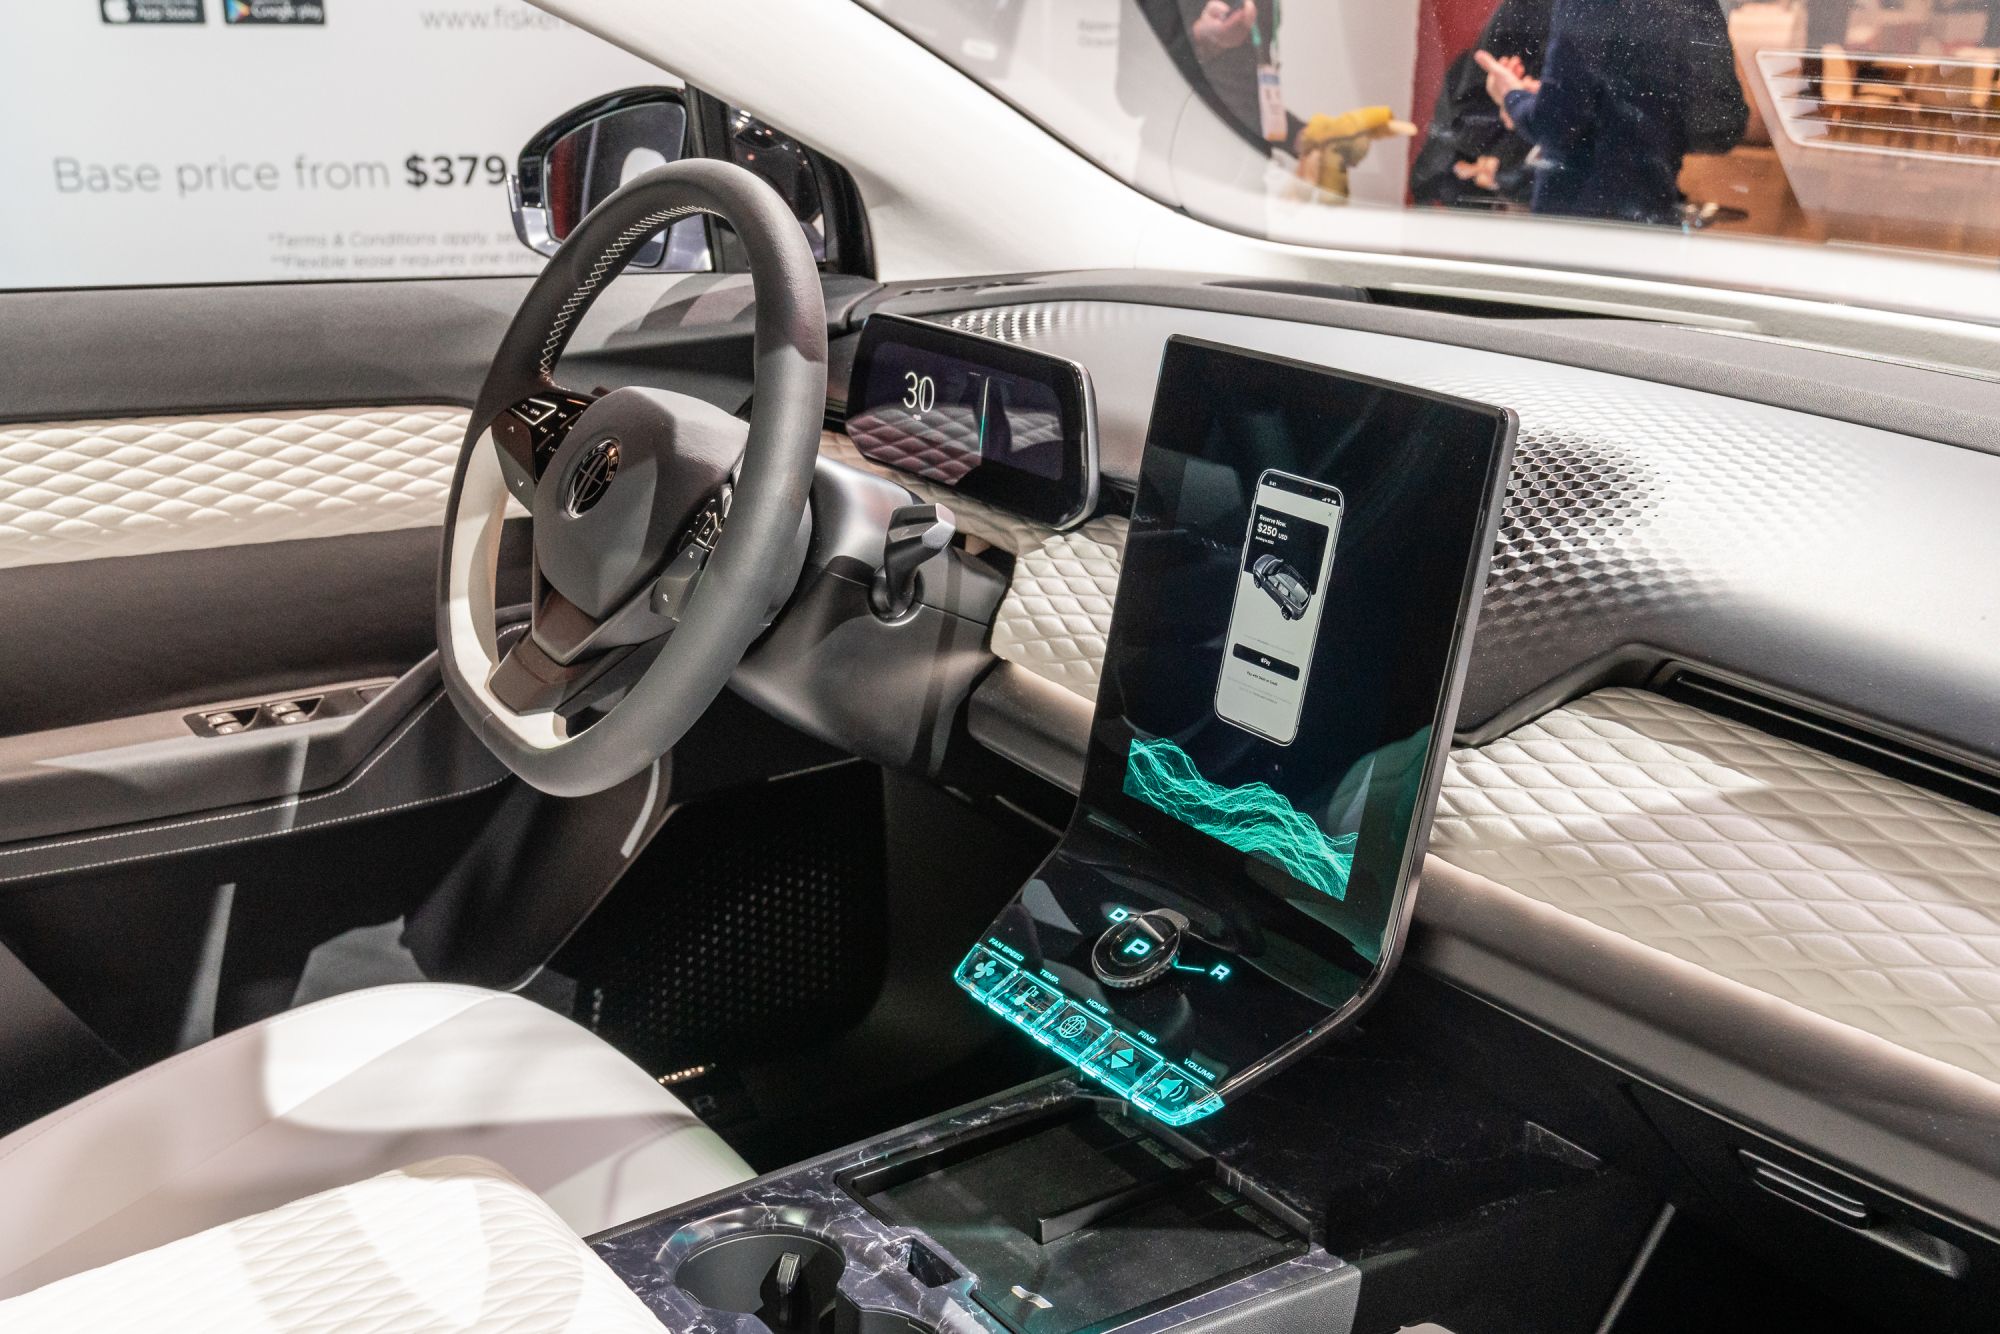 the Ocean Electric SUV  has incredible infotainment system